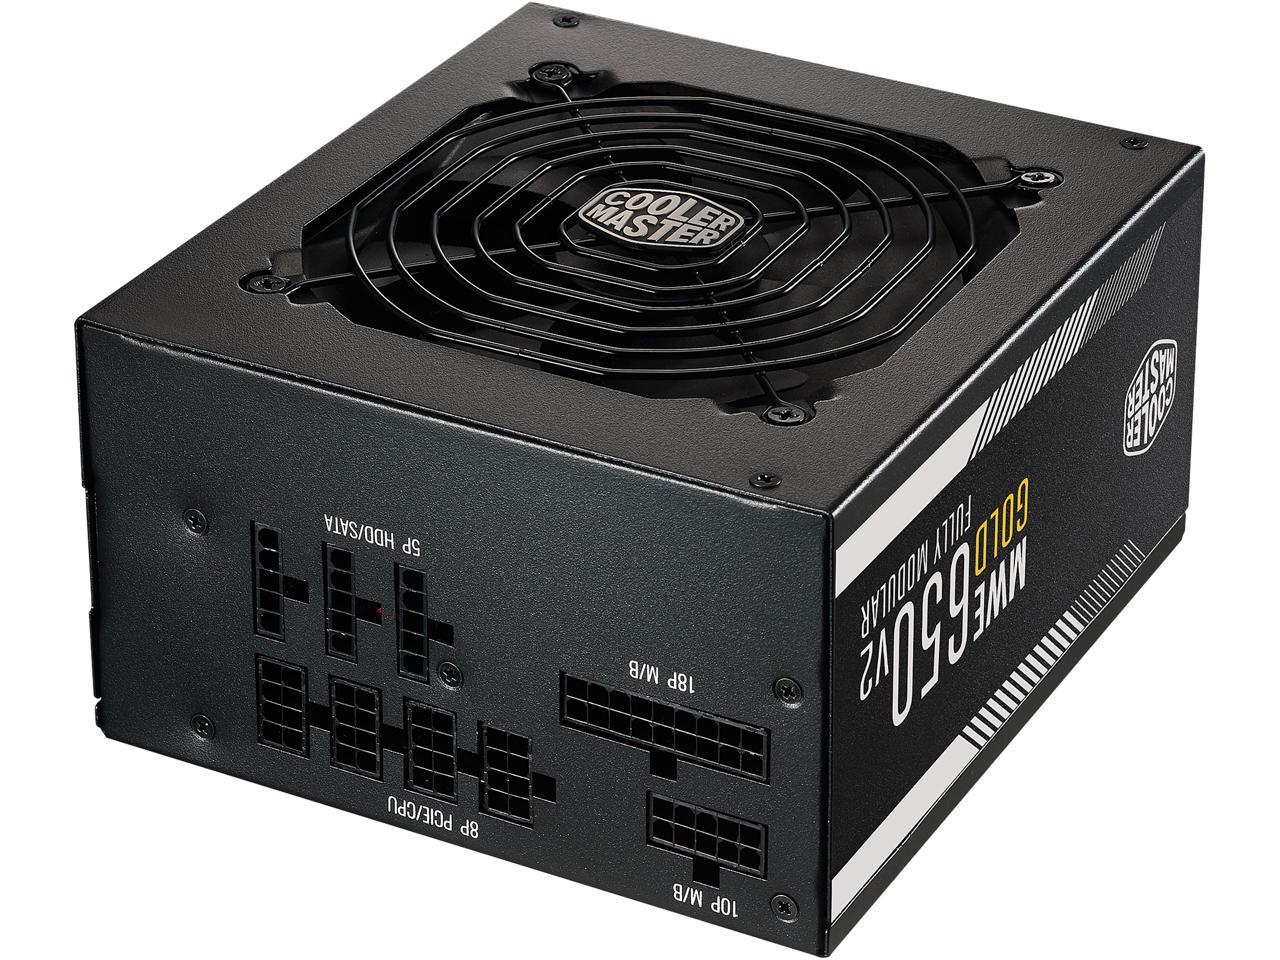 Cooler Master Mpe-6501-Afaag-Us 80 Plus Gold 650W V2 Full Modular Atx 12V Power Supply W/ Active Pfc